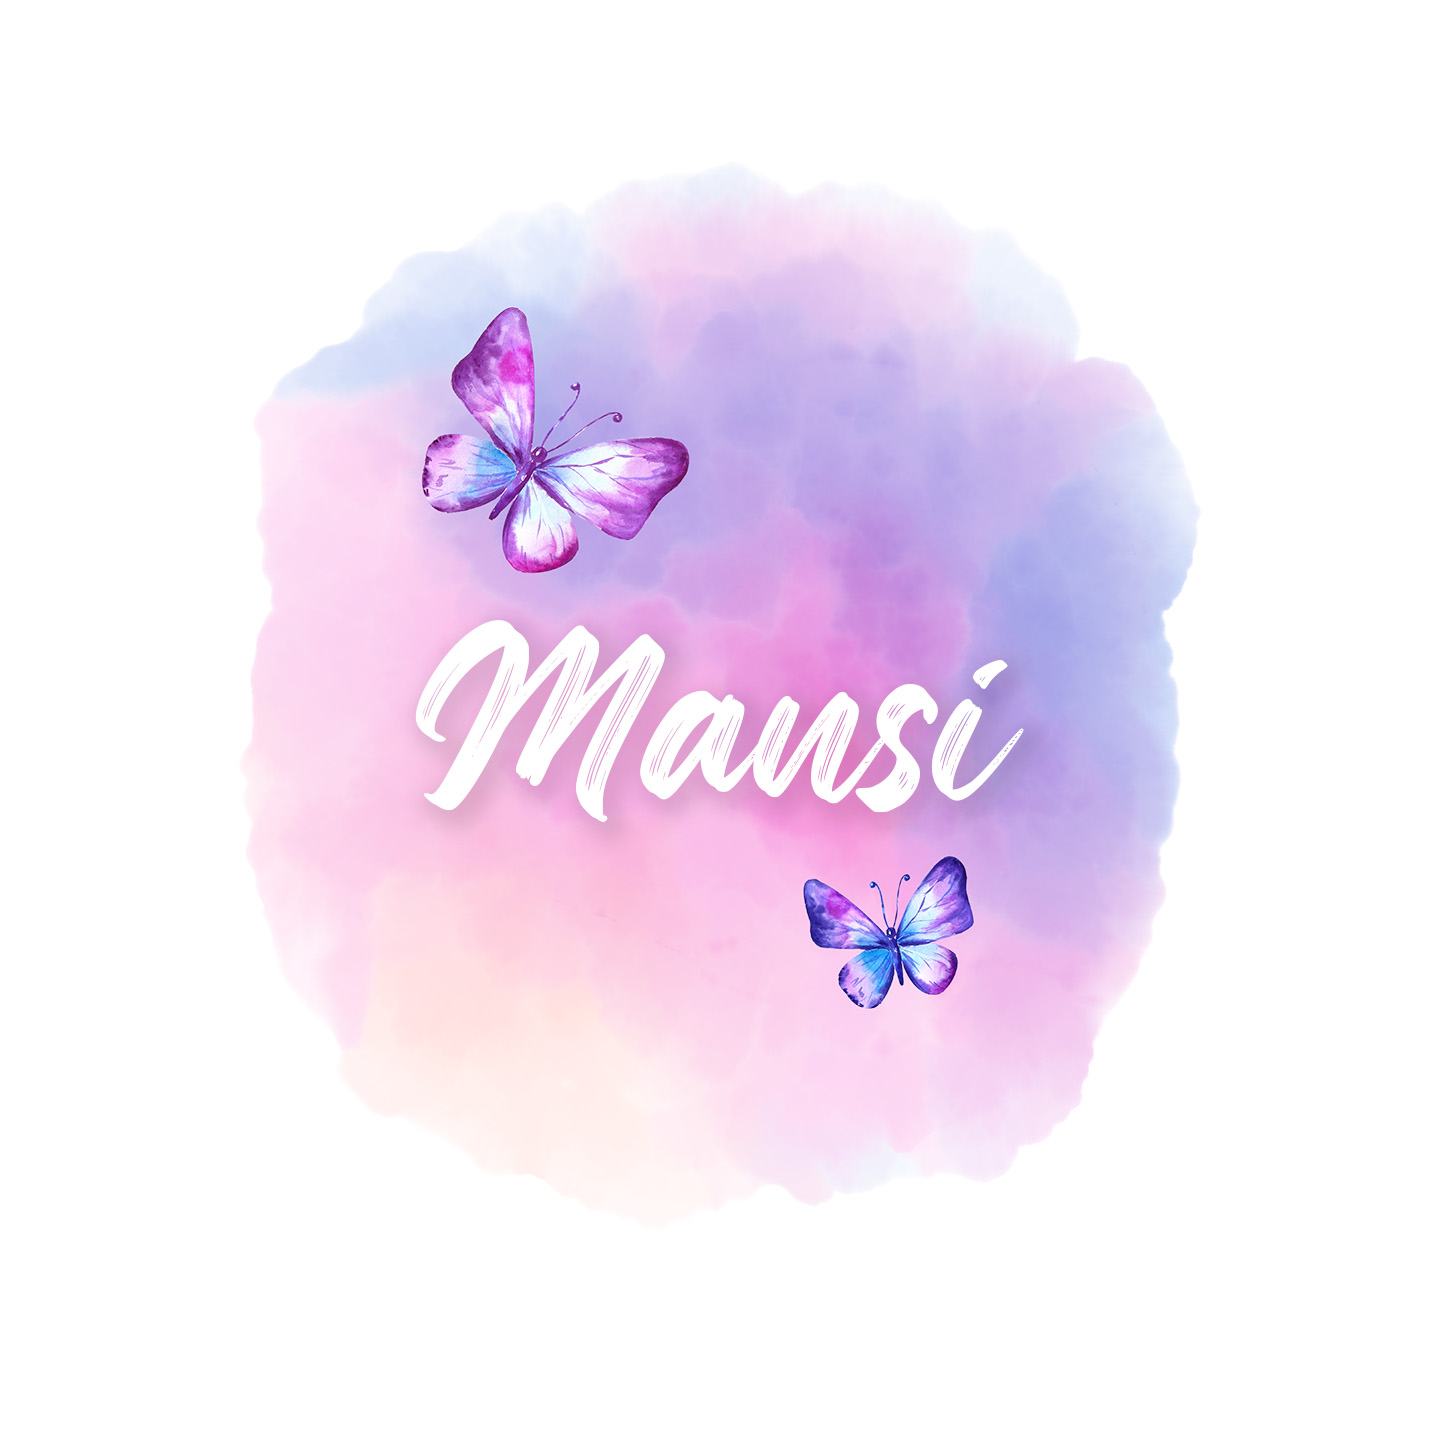 The meaning of mansi - Name meanings